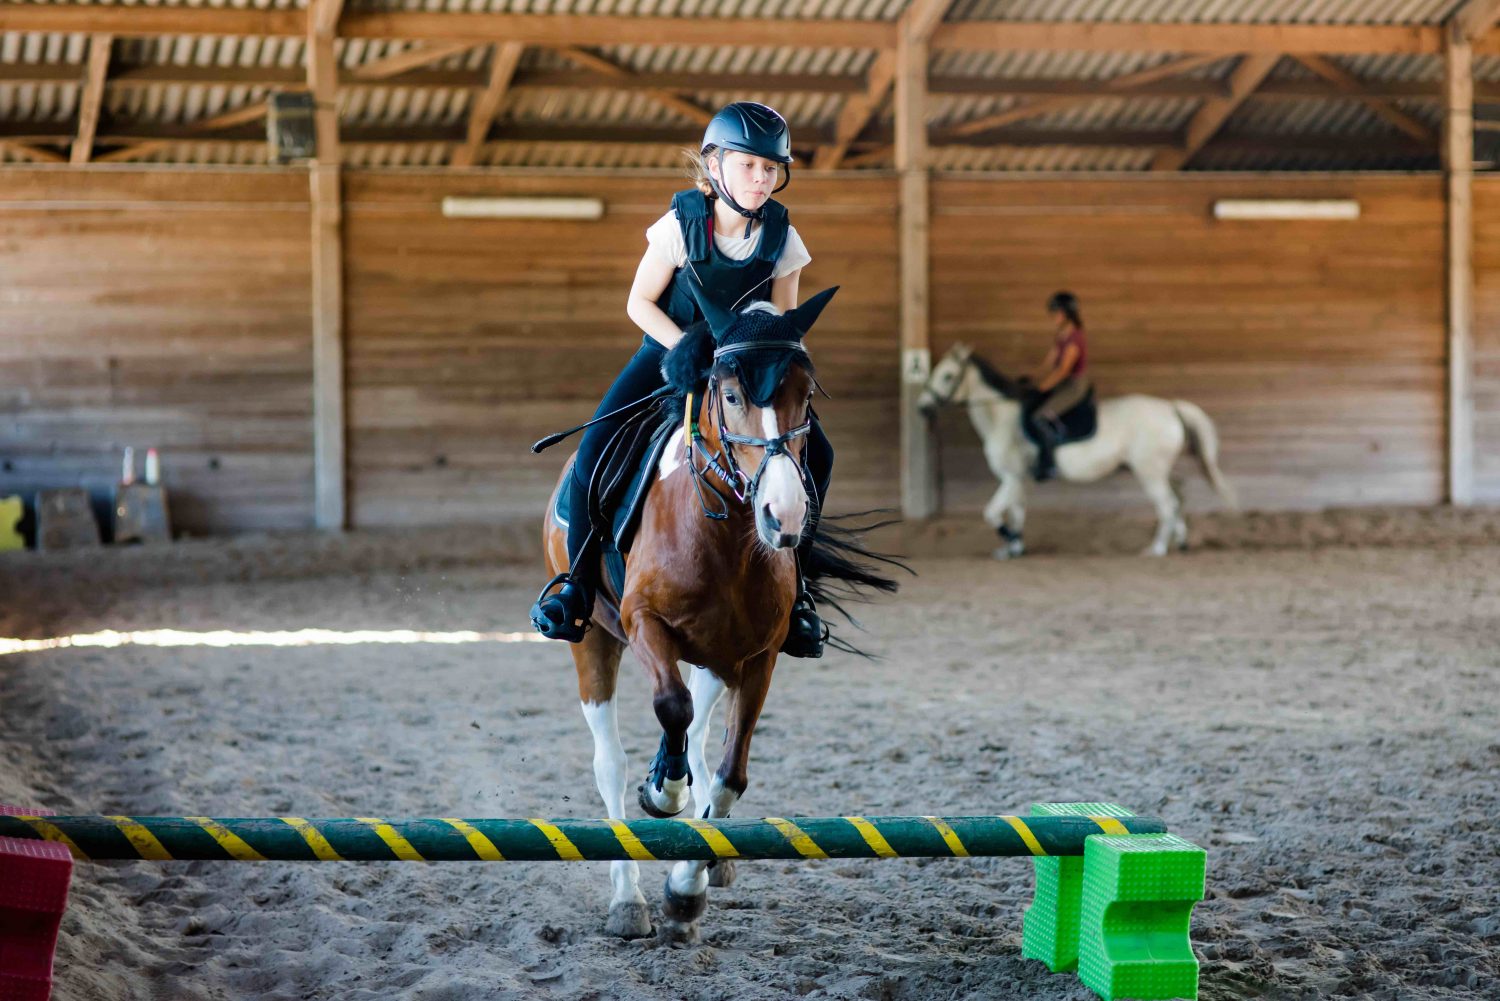 Schedule Your Lessons With A Horse Lesson Scheduling App